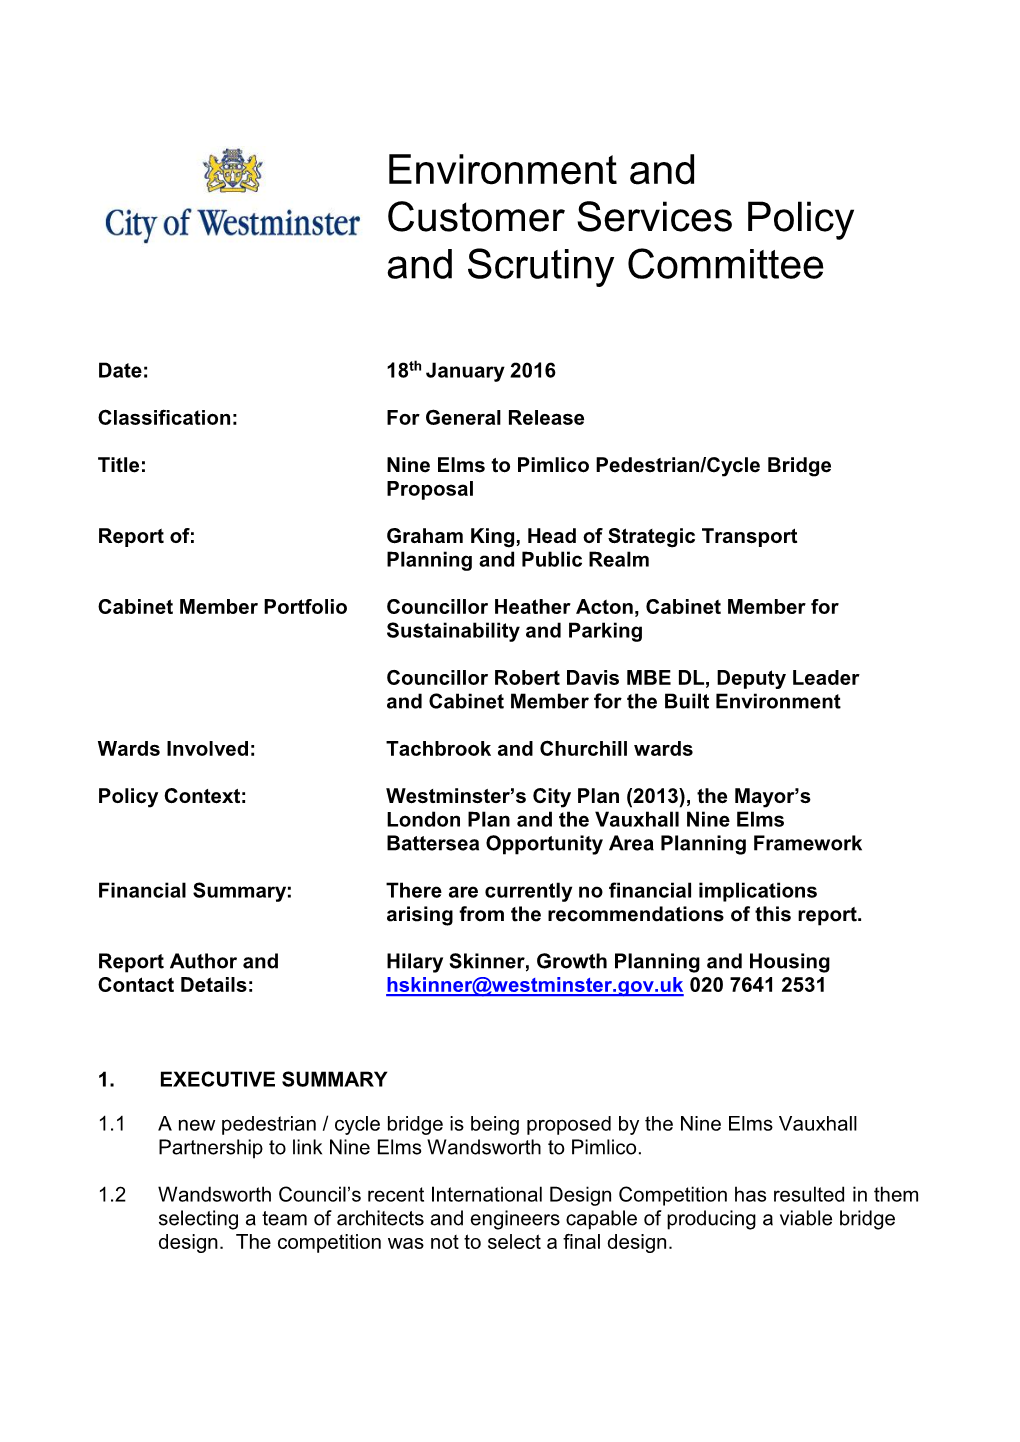 Environment and Customer Services Policy and Scrutiny Committee